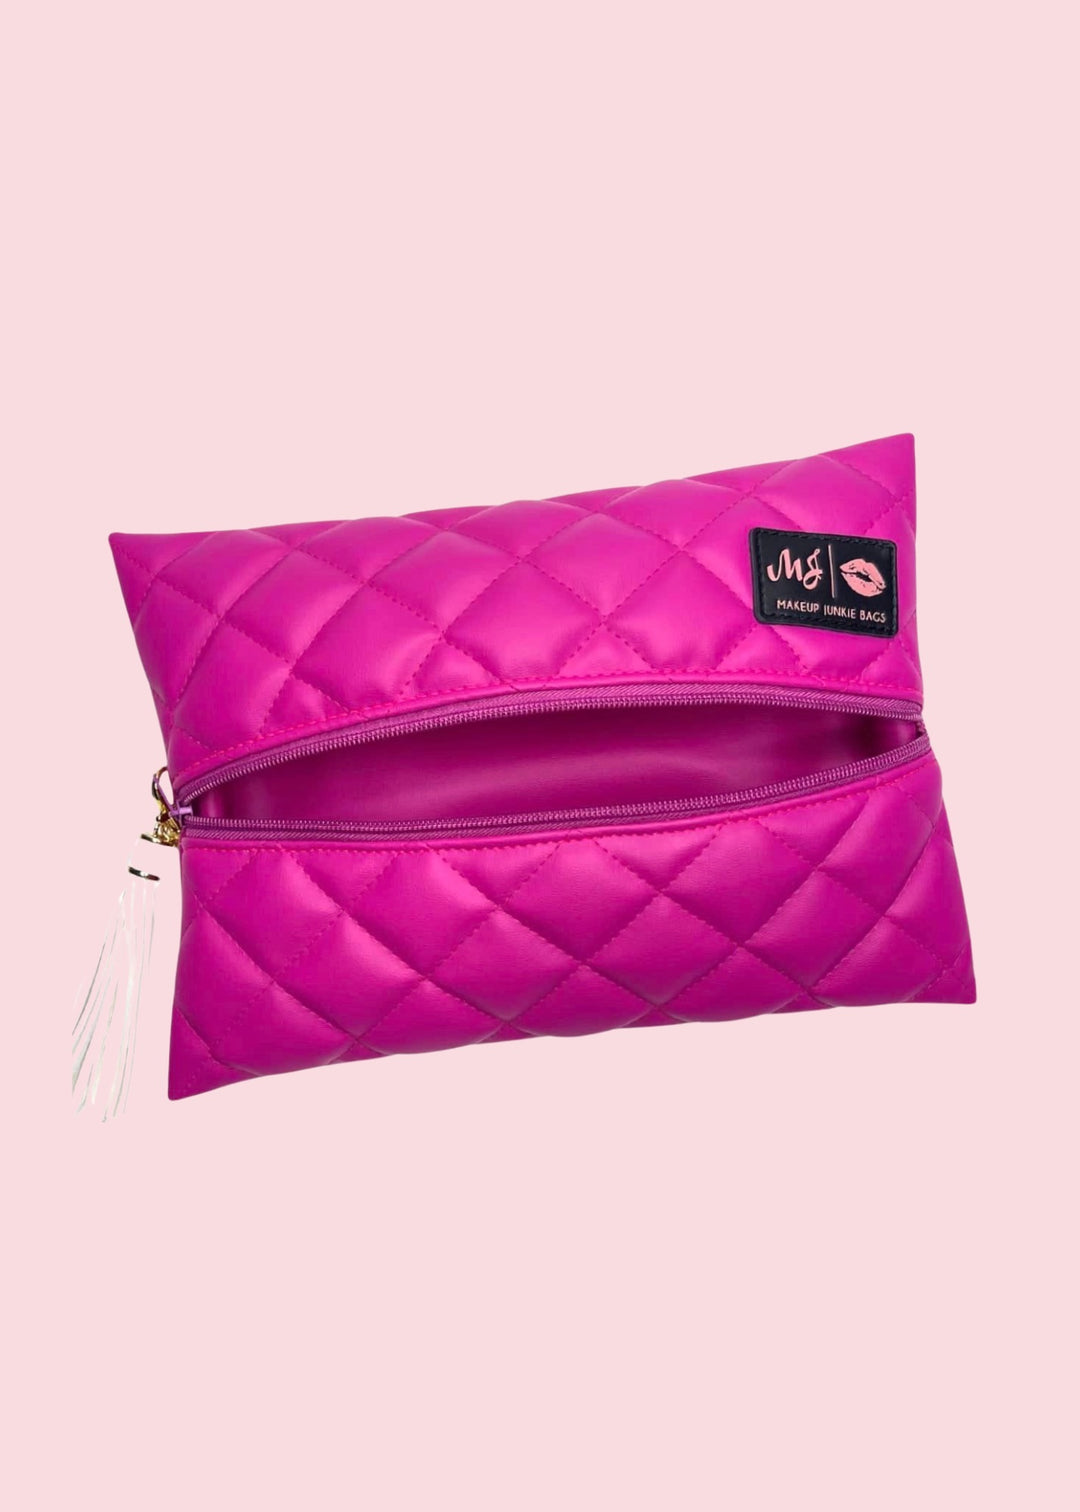 Makeup Junkie Bags - Luxe Hot Fuchsia Flat Lay [Pre Order]